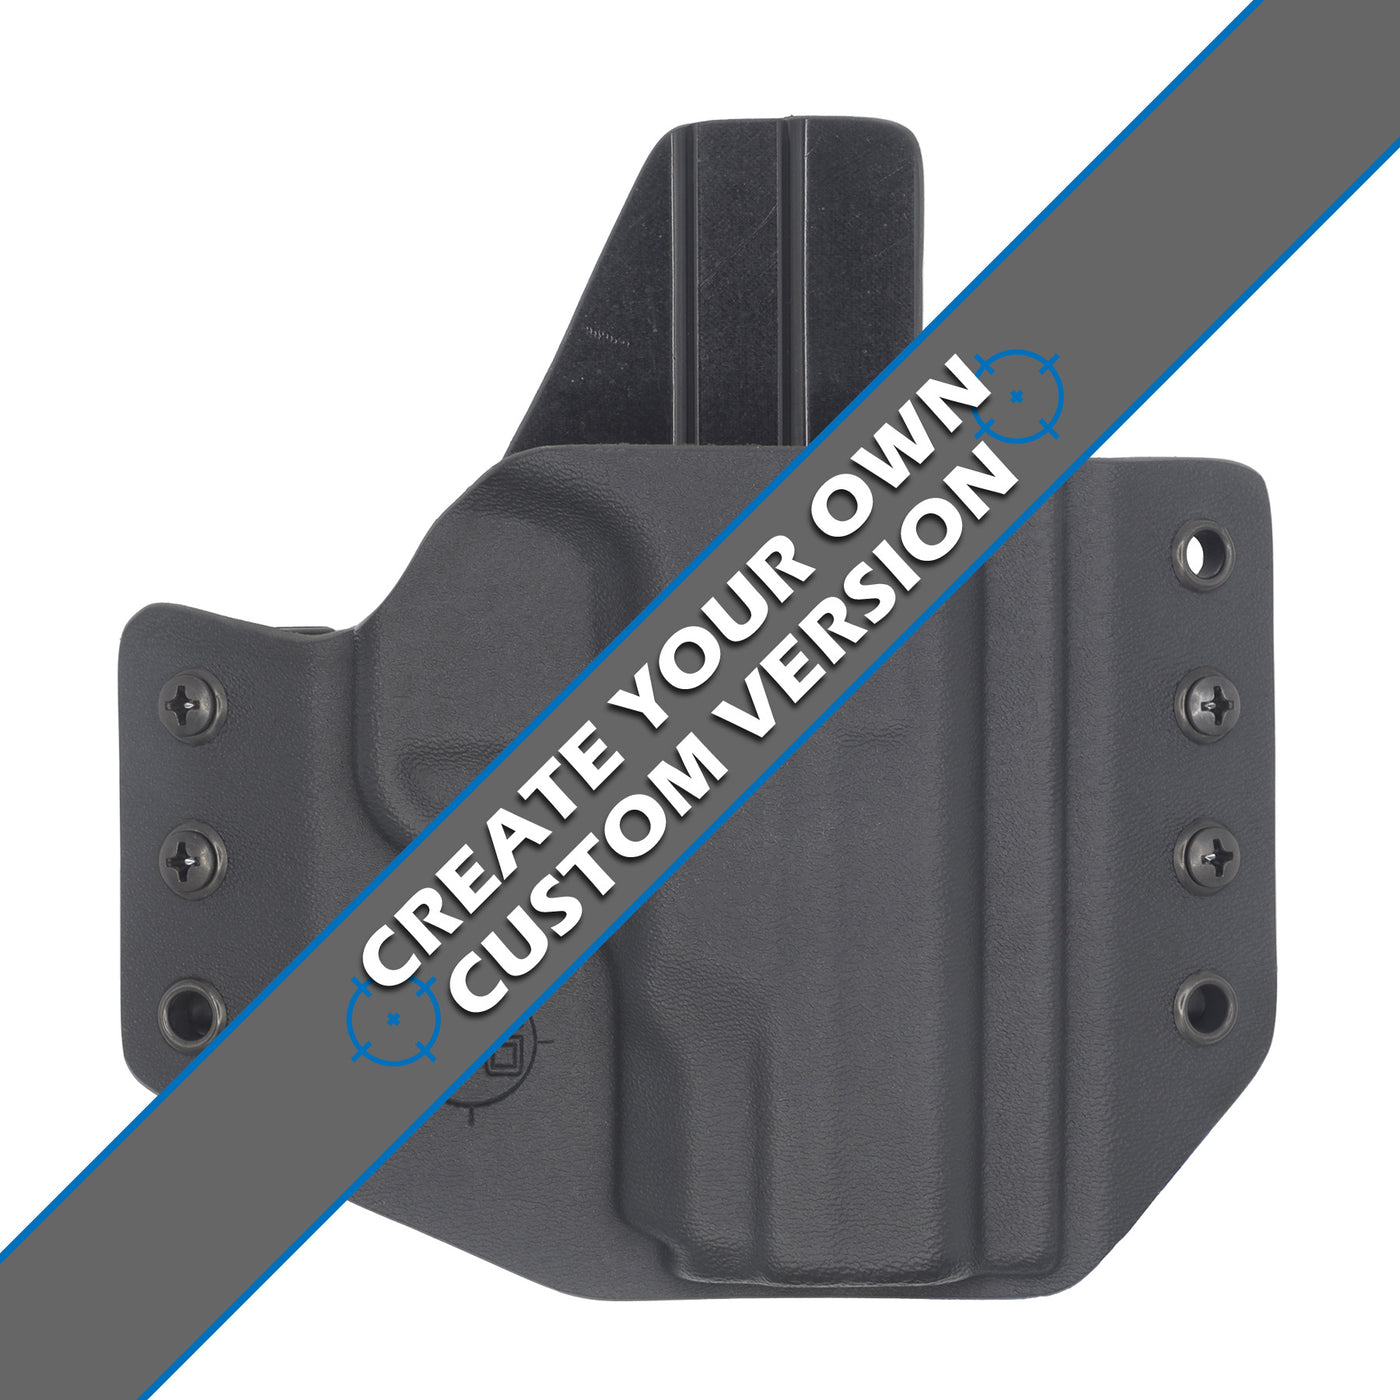 Kydex OWB Holster Smith & Wesson S&W M&P Shield